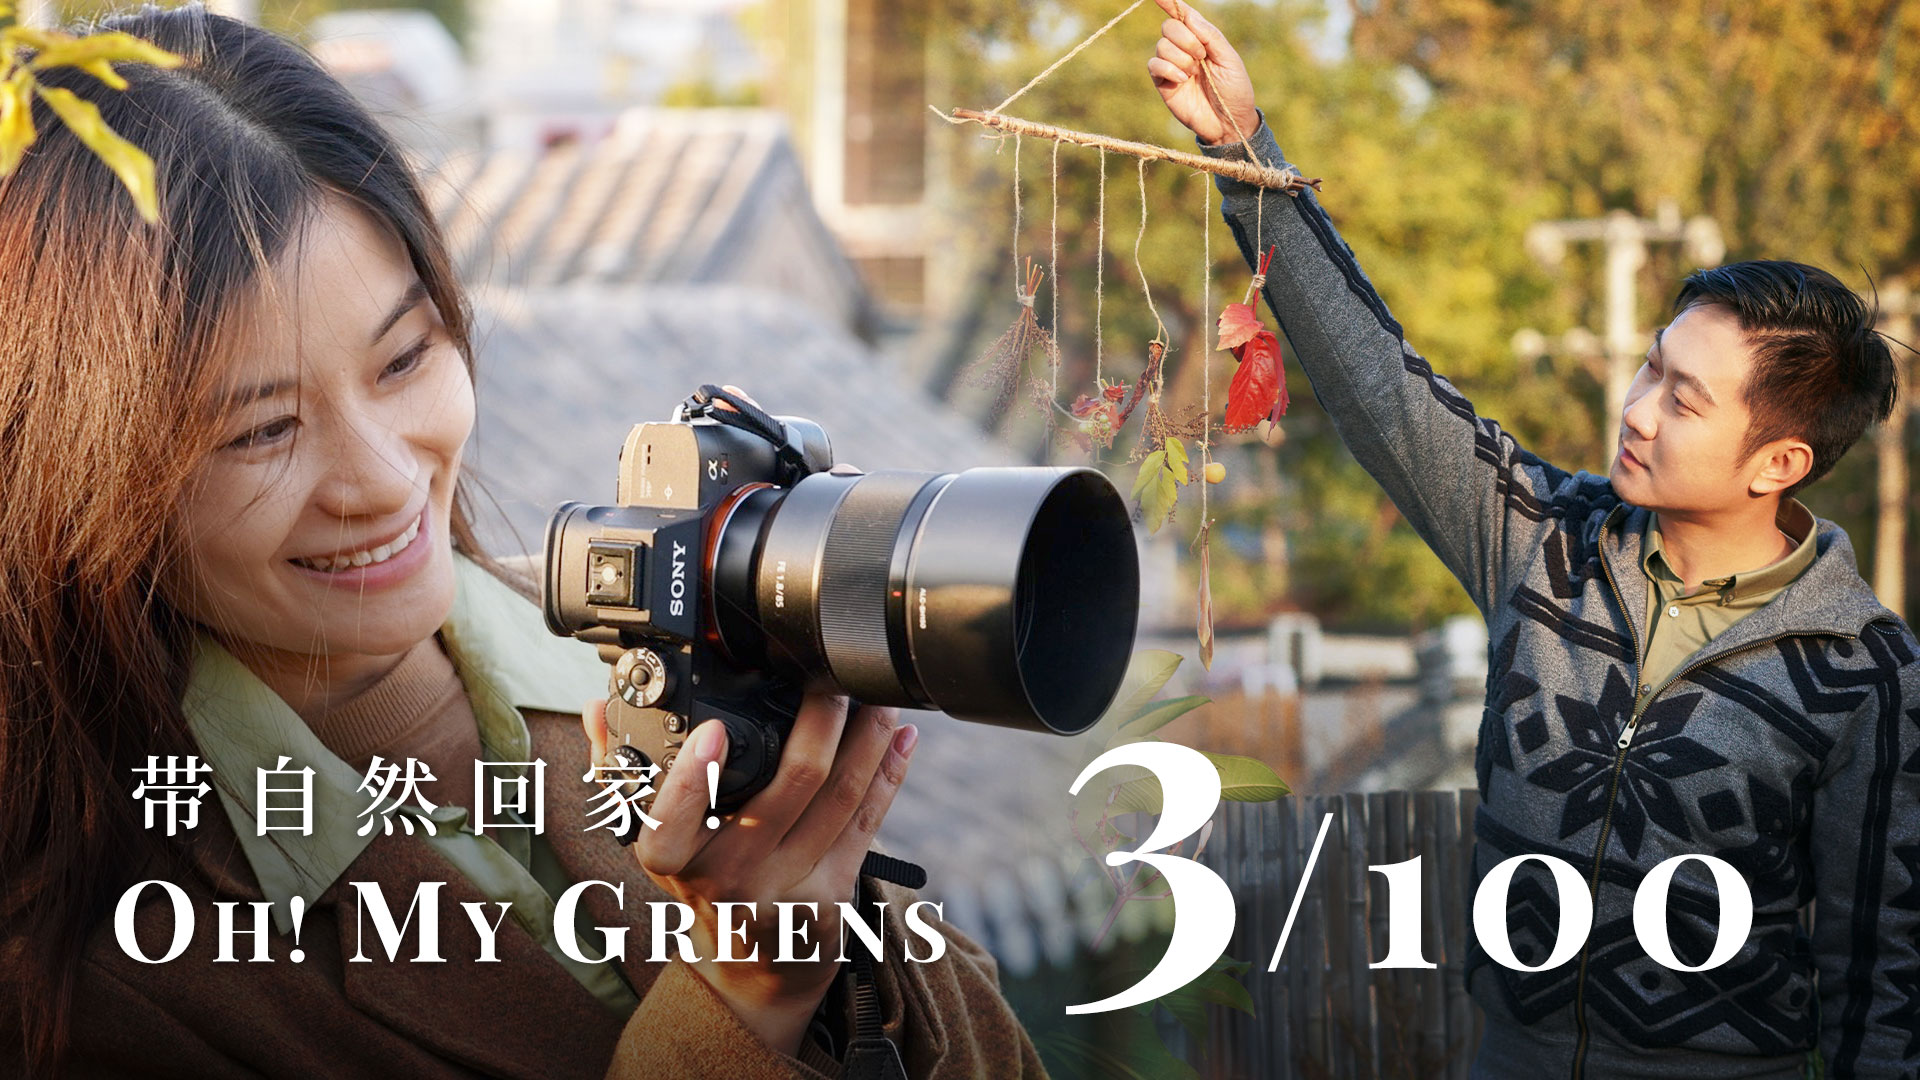 'Oh! My Greens' Ep. 3: Grab the  autumn in Beijing's hutong garden